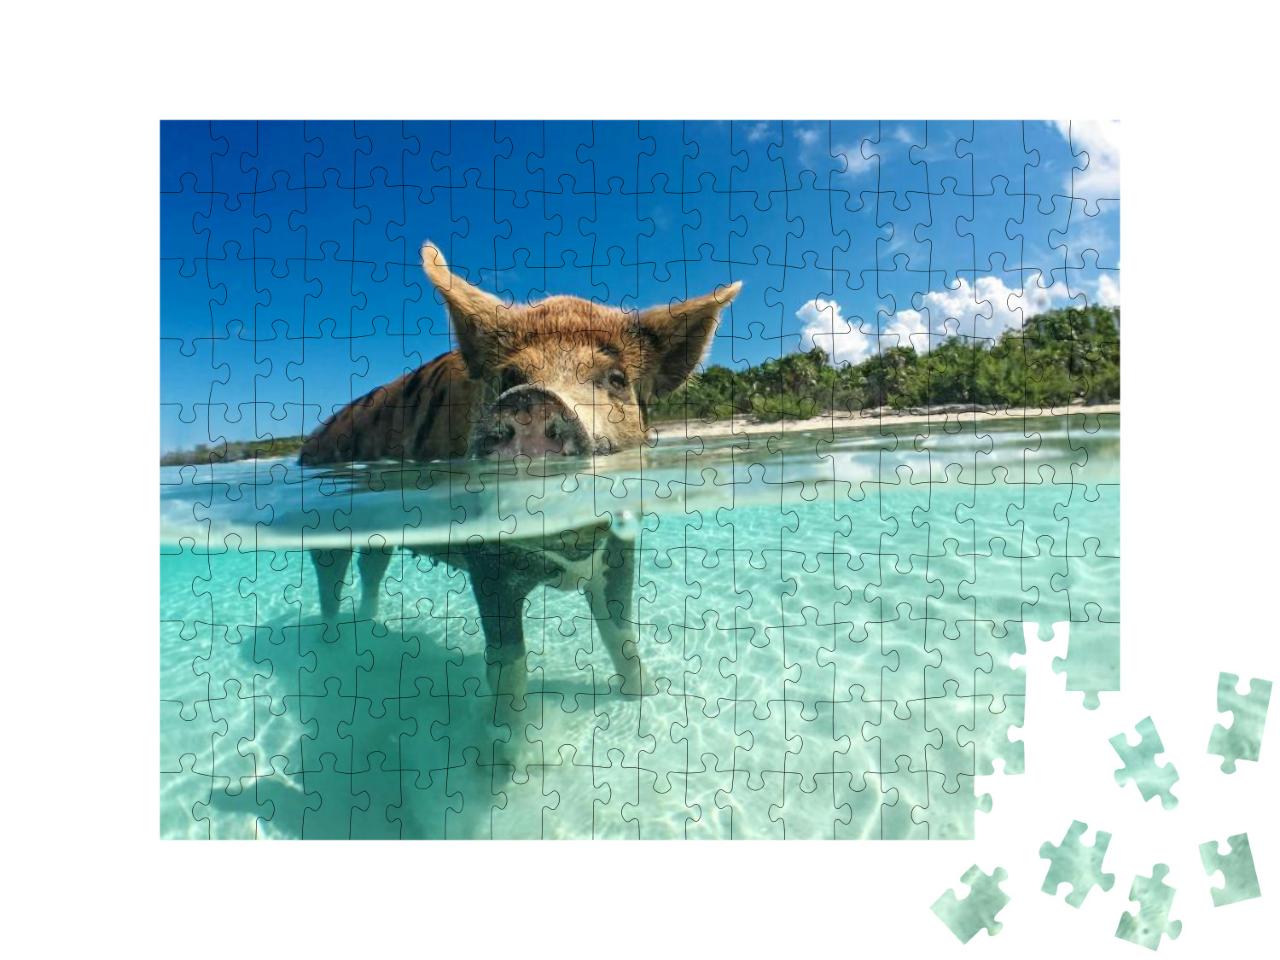 Wild, Swimming Pig on Big Majors Cay in the Bahamas... Jigsaw Puzzle with 200 pieces